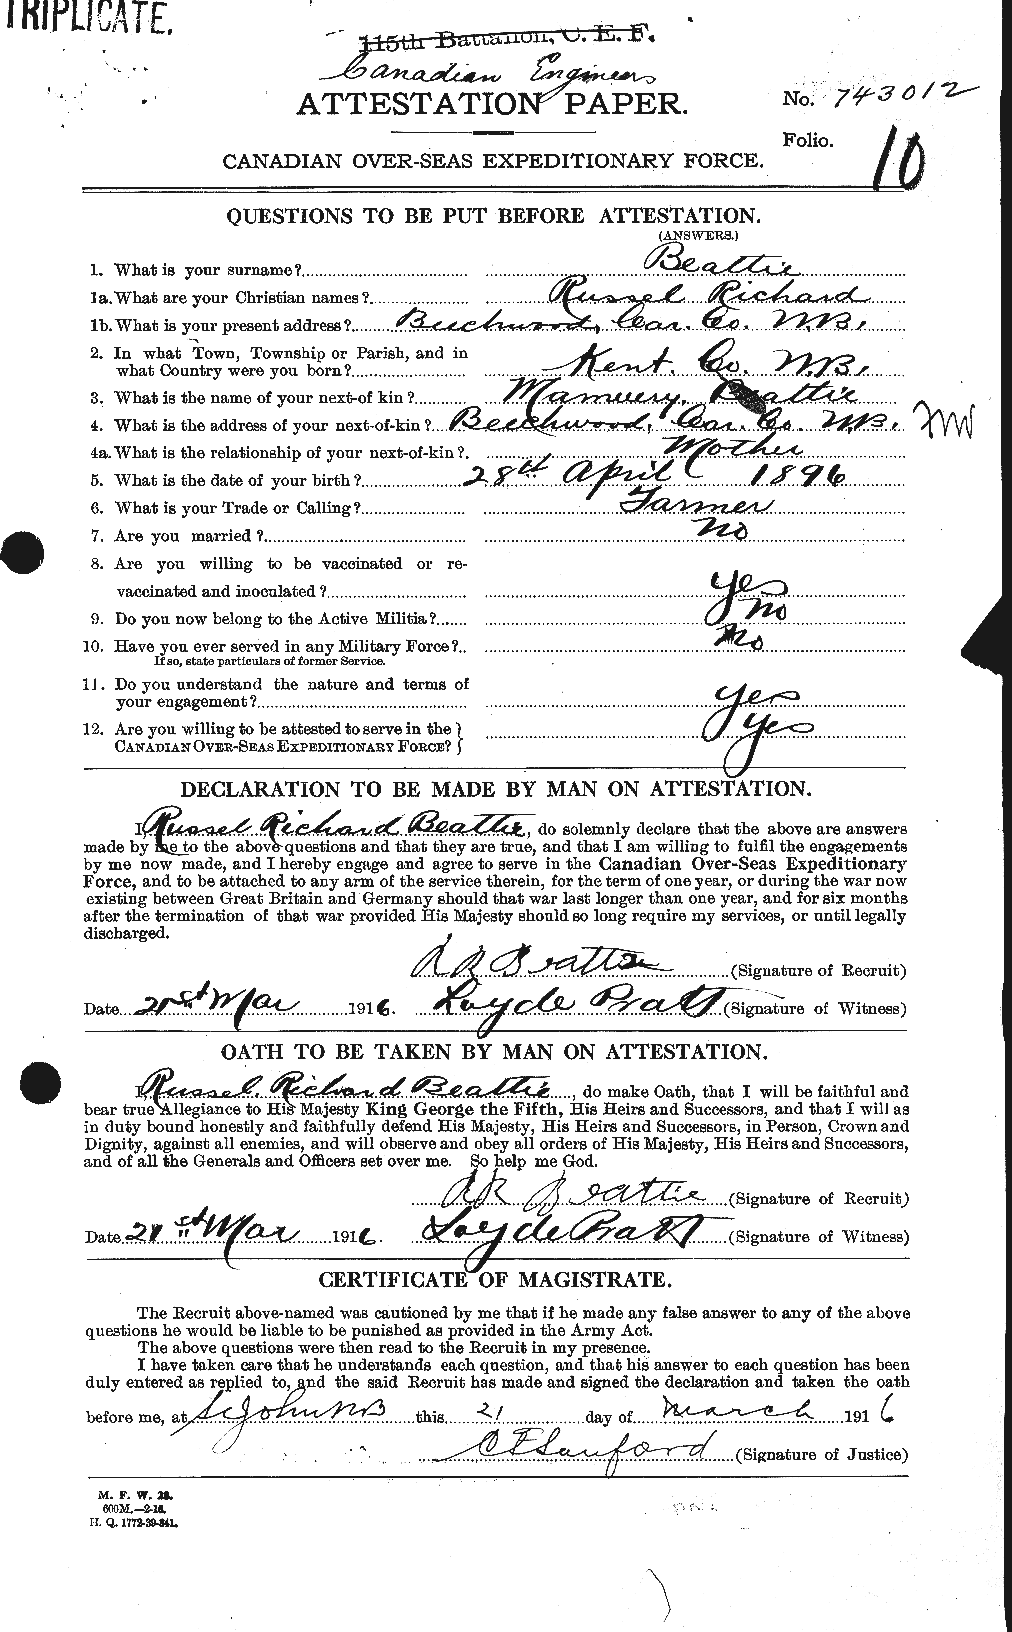 Personnel Records of the First World War - CEF 230797a